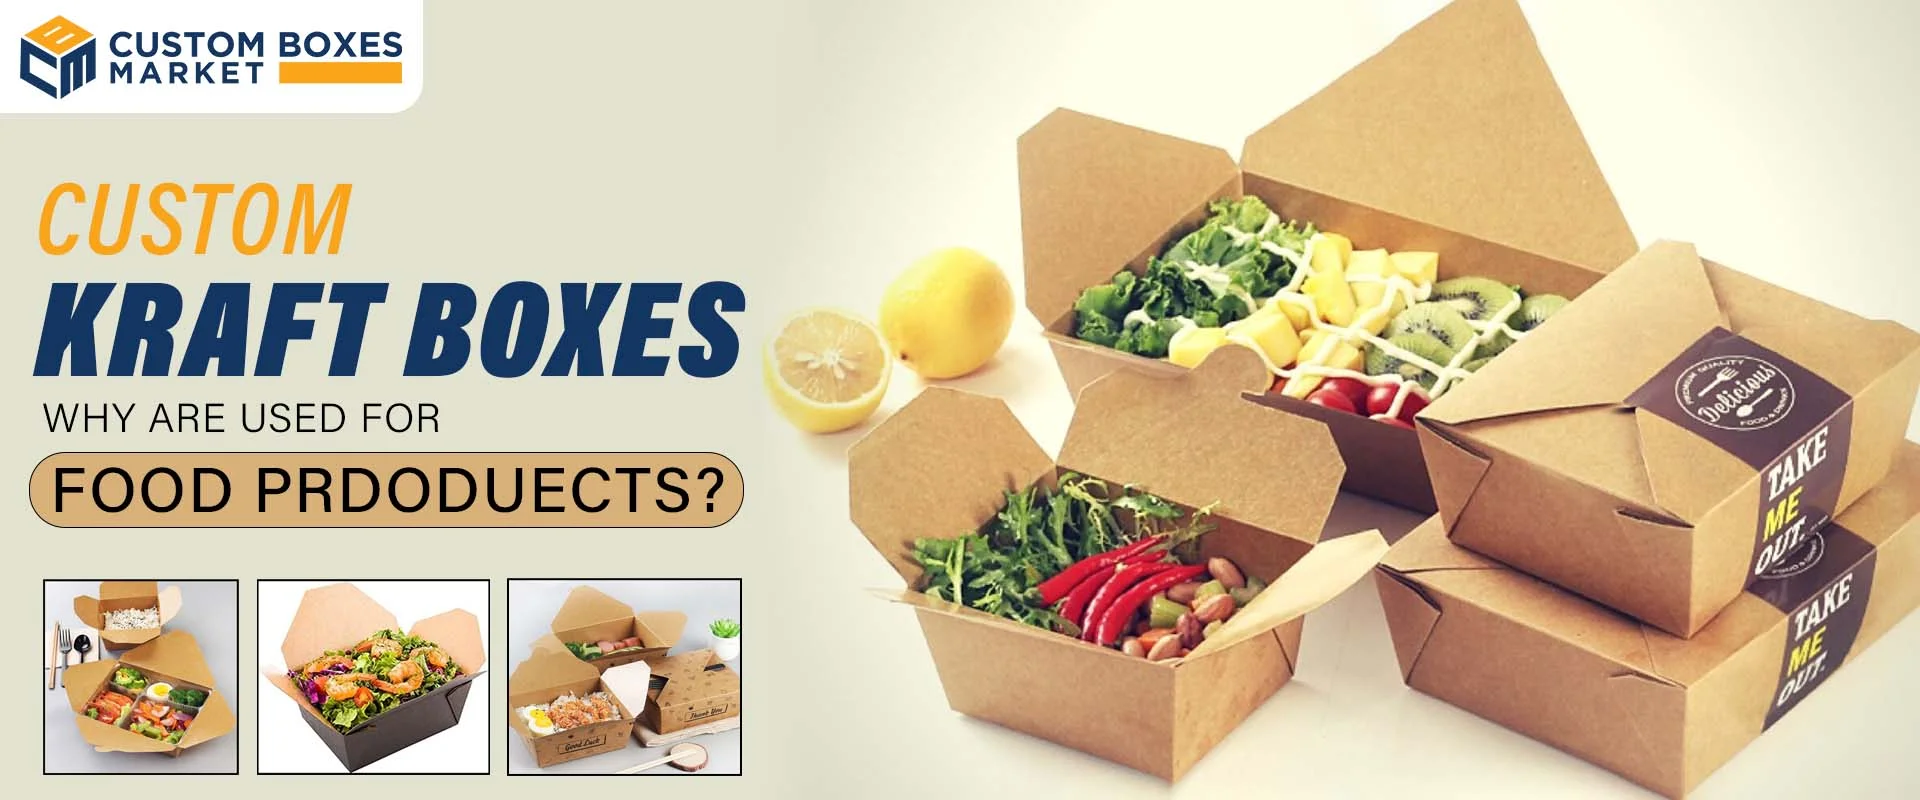 Why Are Custom Kraft Boxes Used For Food Products?